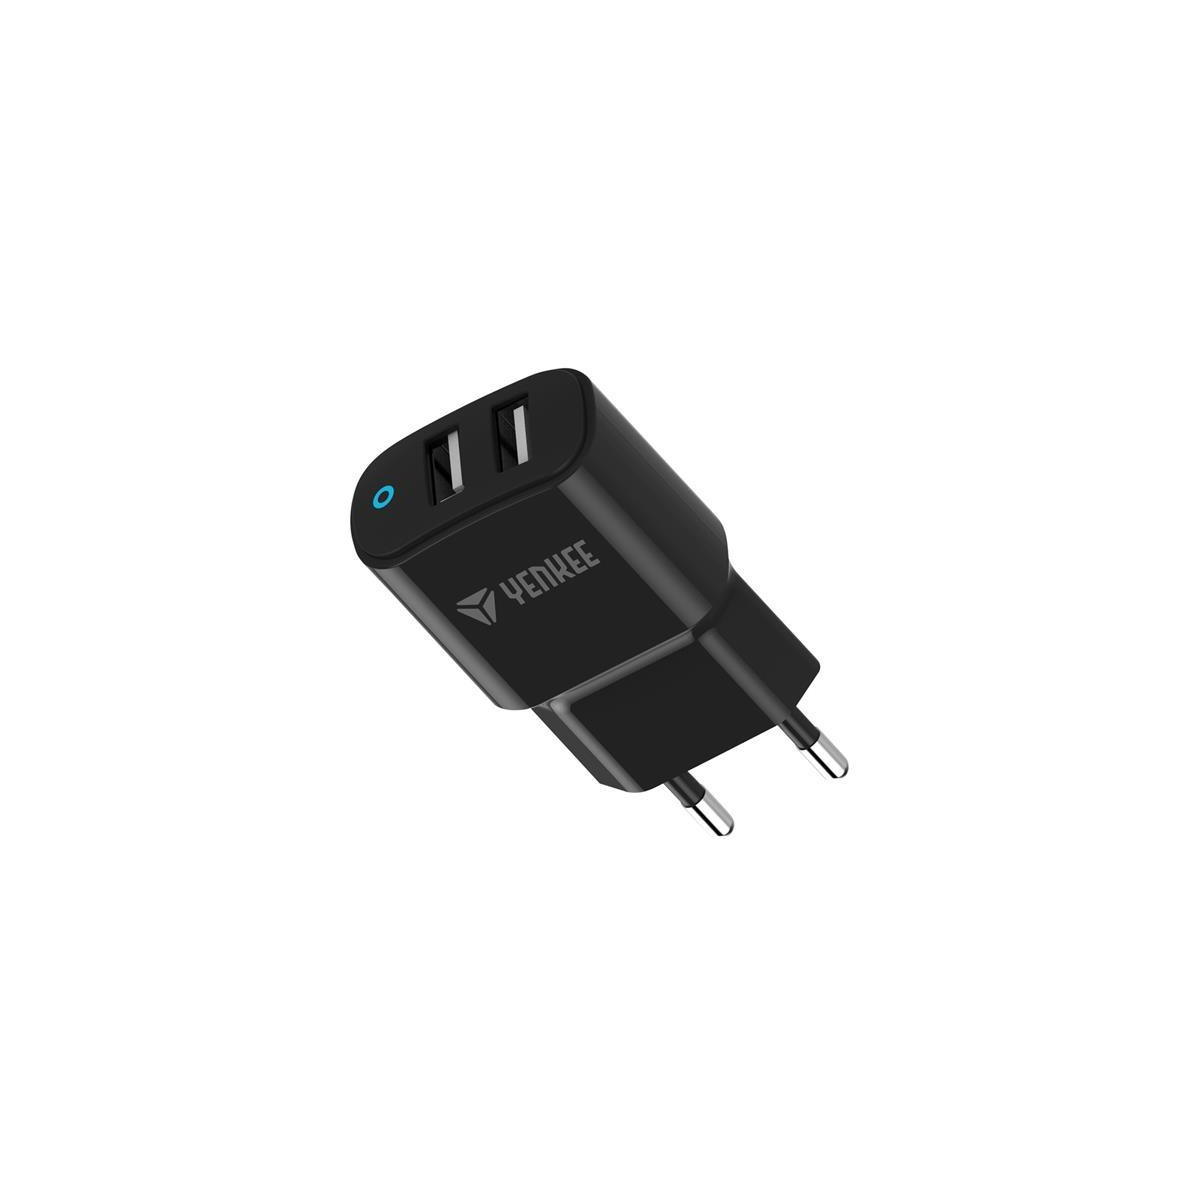 More about Adaptér USB YENKEE YAC 2024 Dual